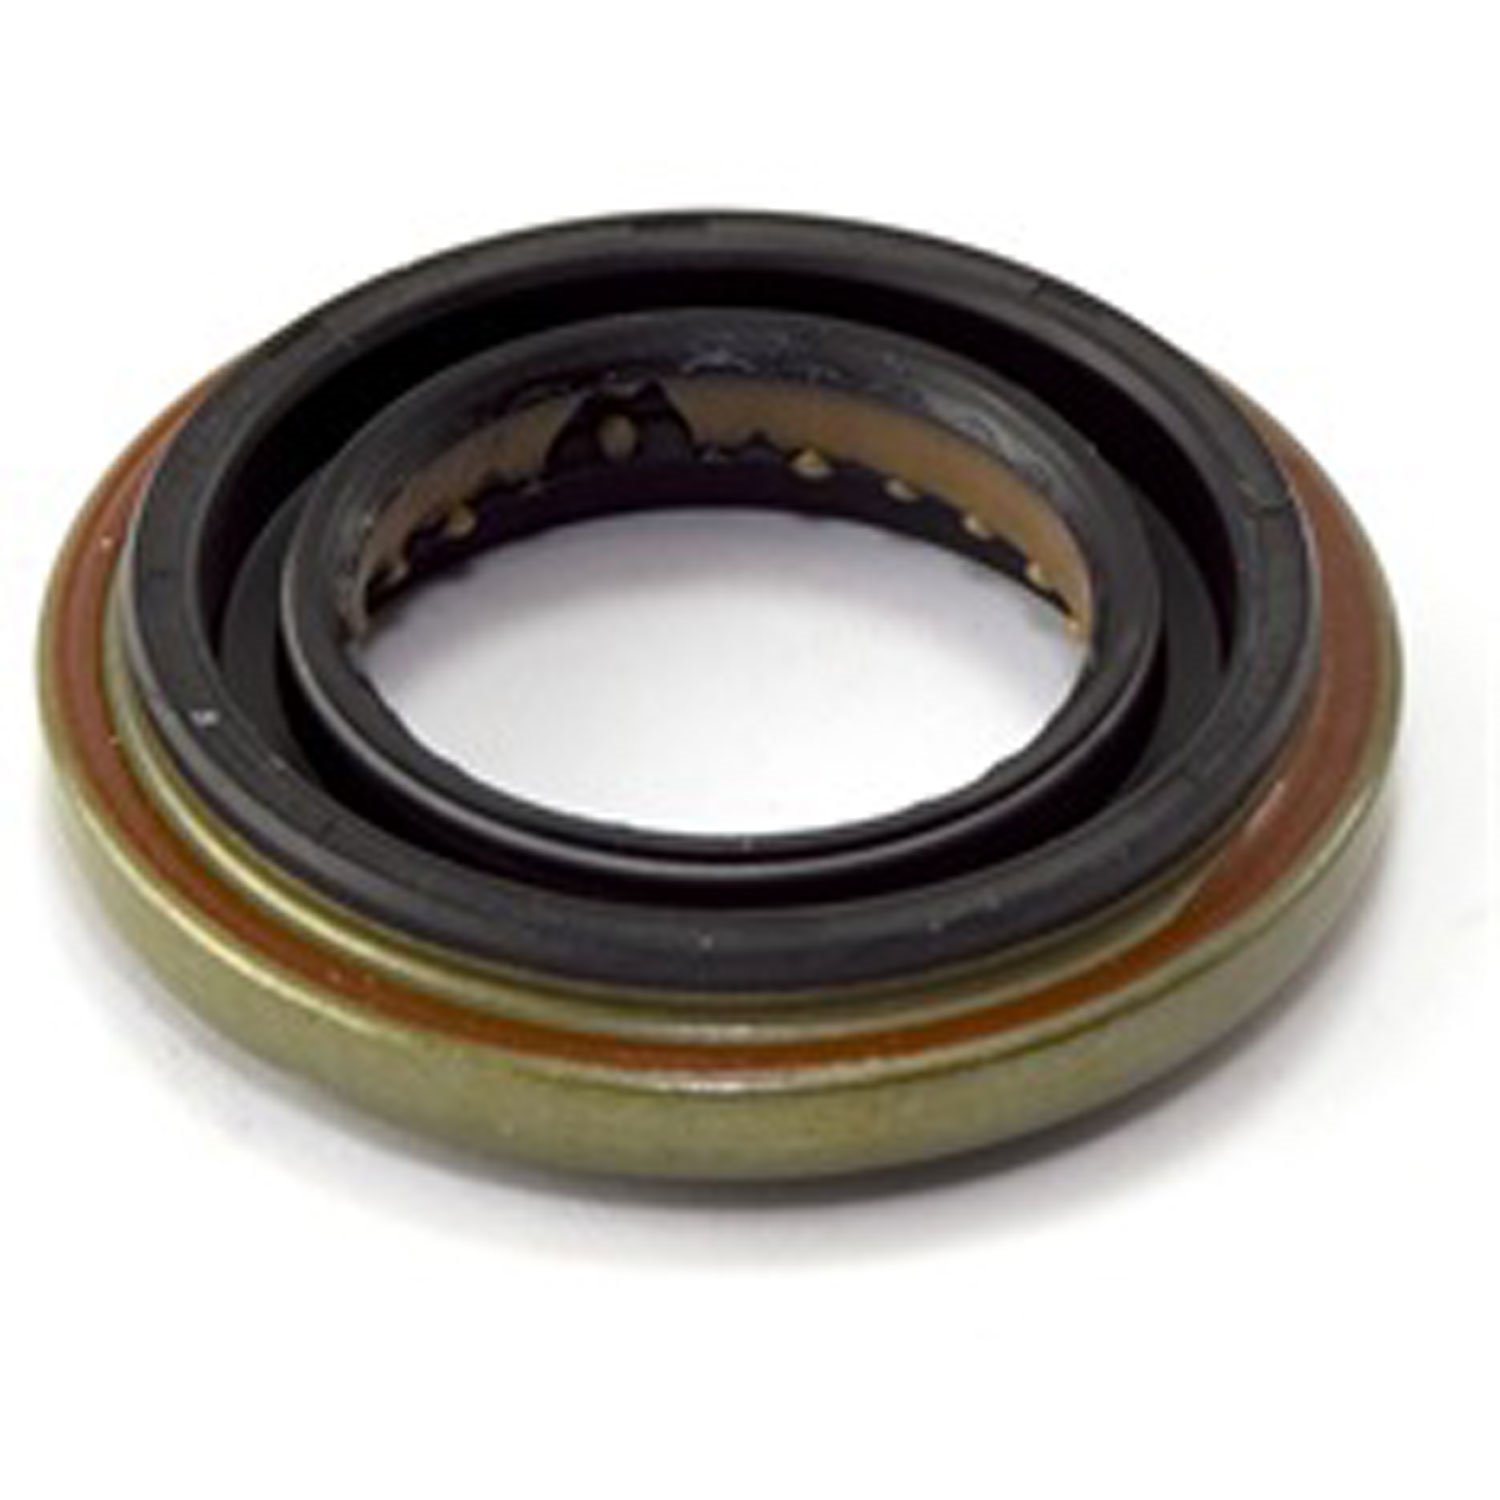 This pinion yoke seal from Omix-ADA for Dana 35 rear axles. It is often needed when performing a U-b